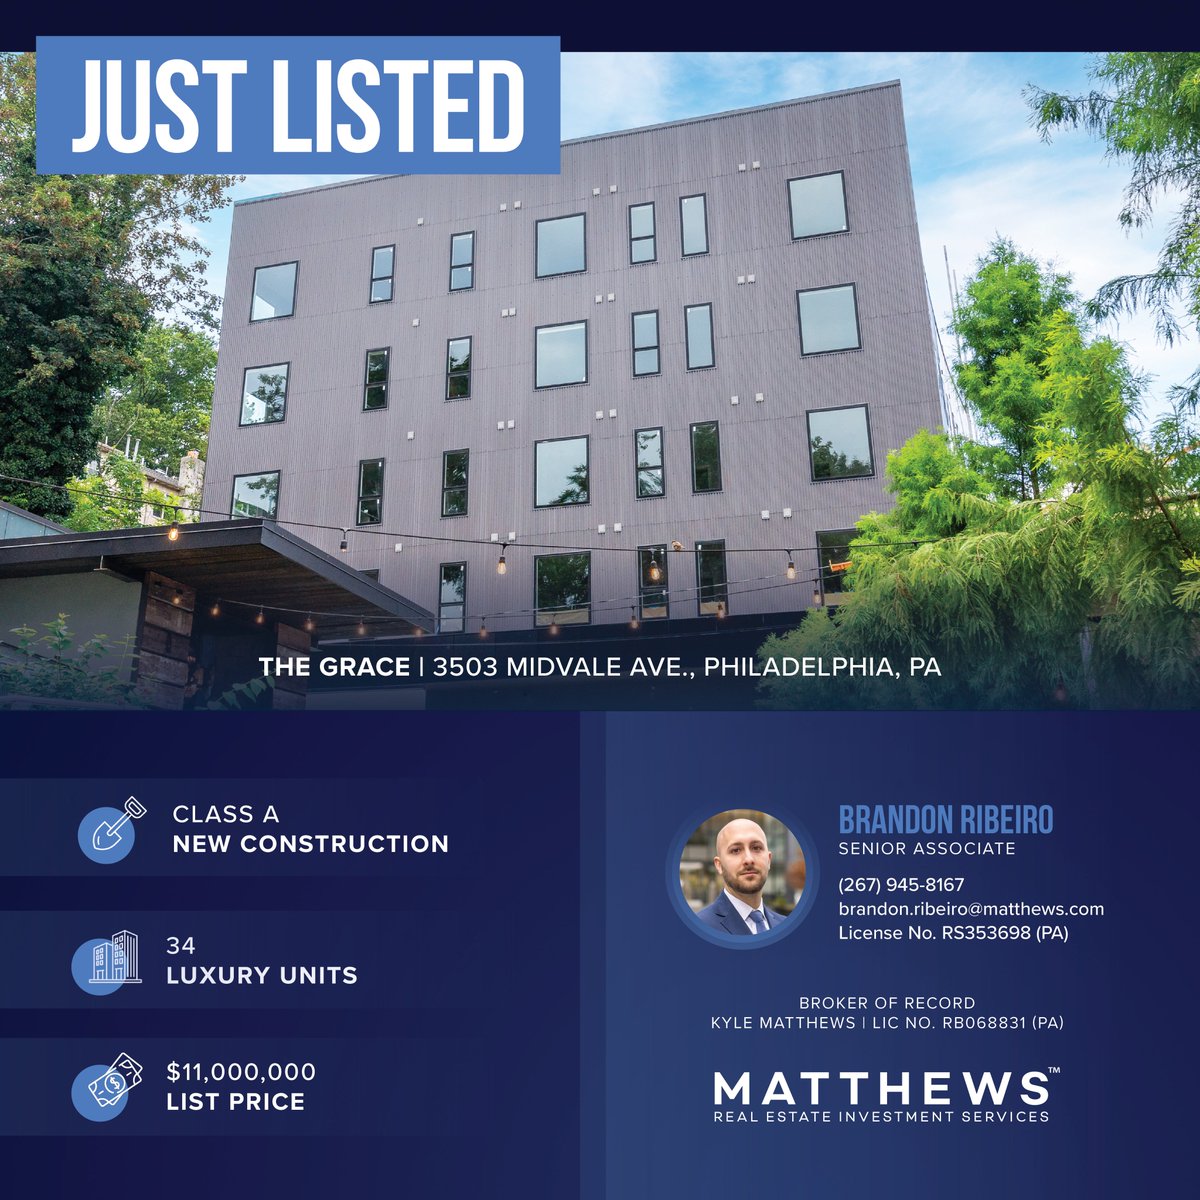 Brandon Ribeiro listed The Grace, a Class A luxury apartment building located in Philadelphia, PA ⭐️ 🔗 More information: matthews.com/press-release/… #Matthews #CRE #RealEstate #Multifamily #ClassAMultifamily